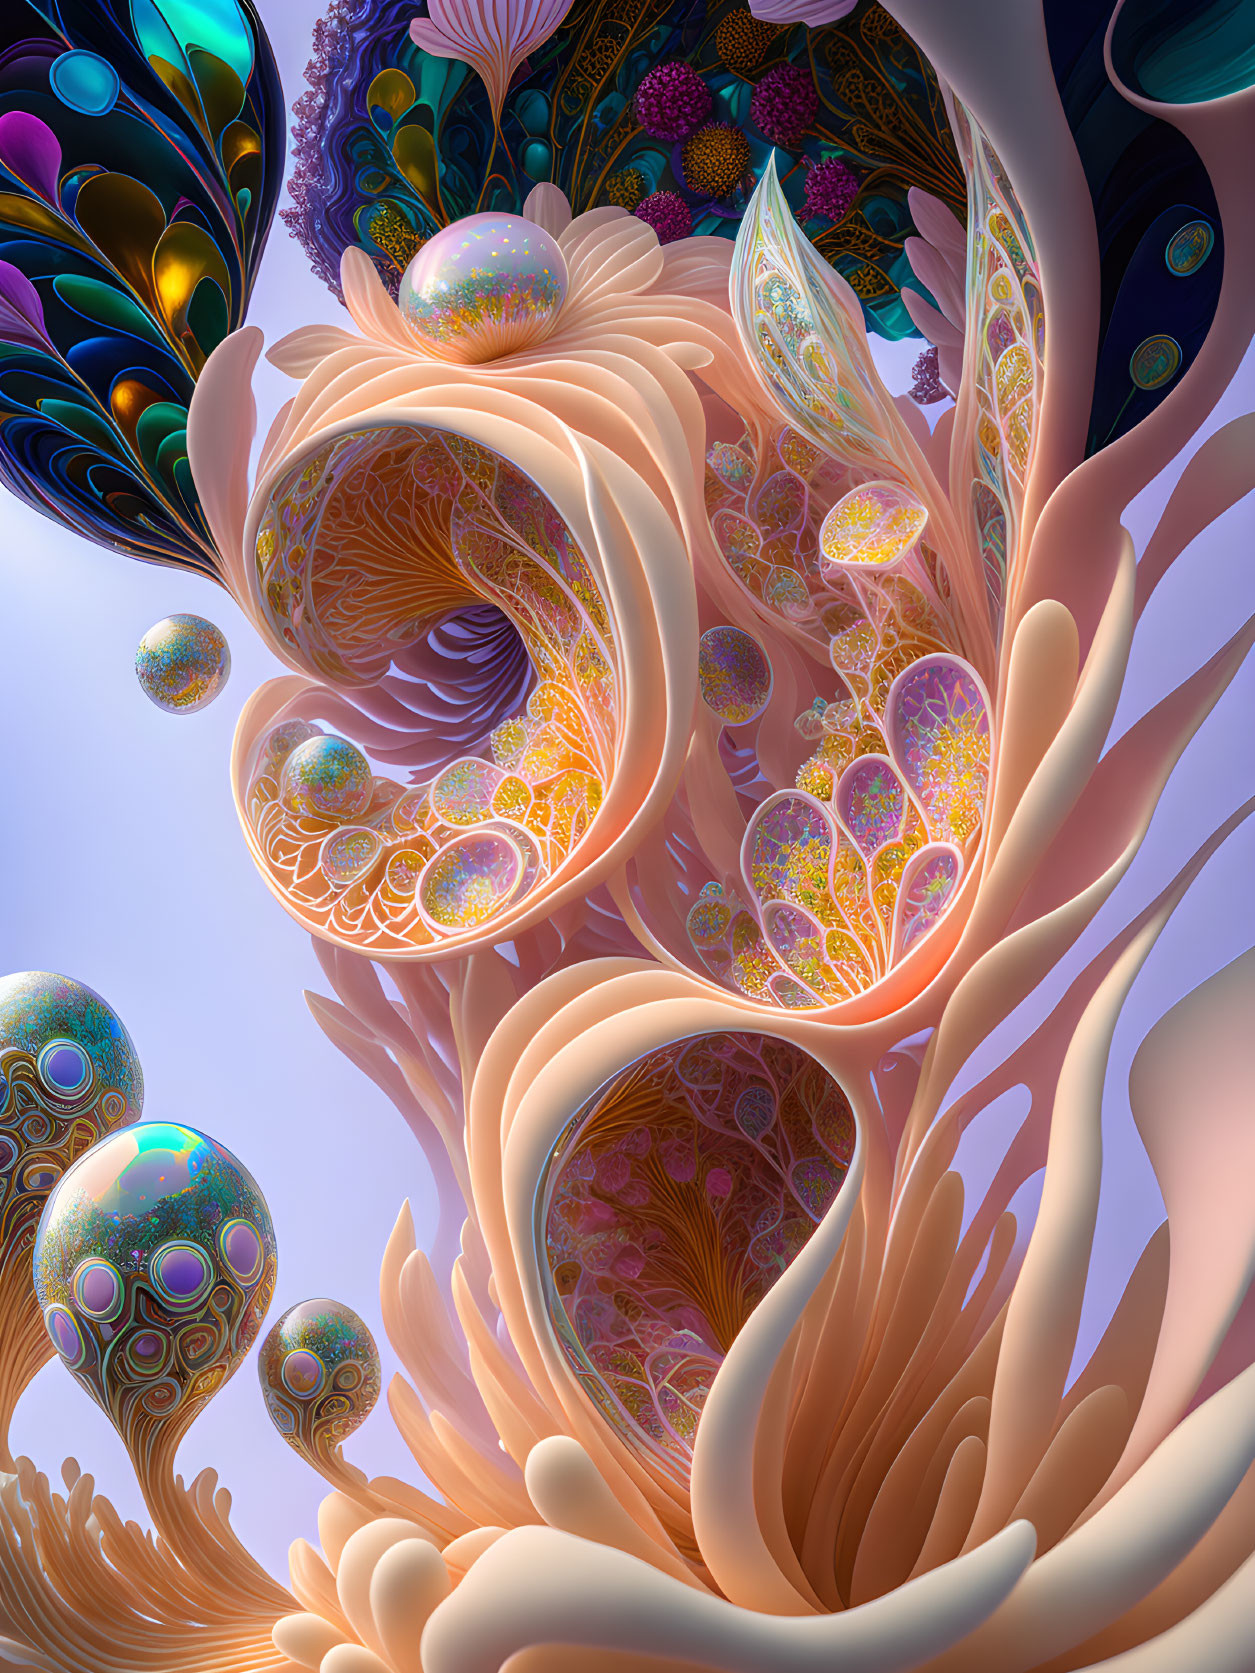 Colorful digital artwork: Intricate organic shapes, pastel colors, floating orbs, detailed patterns